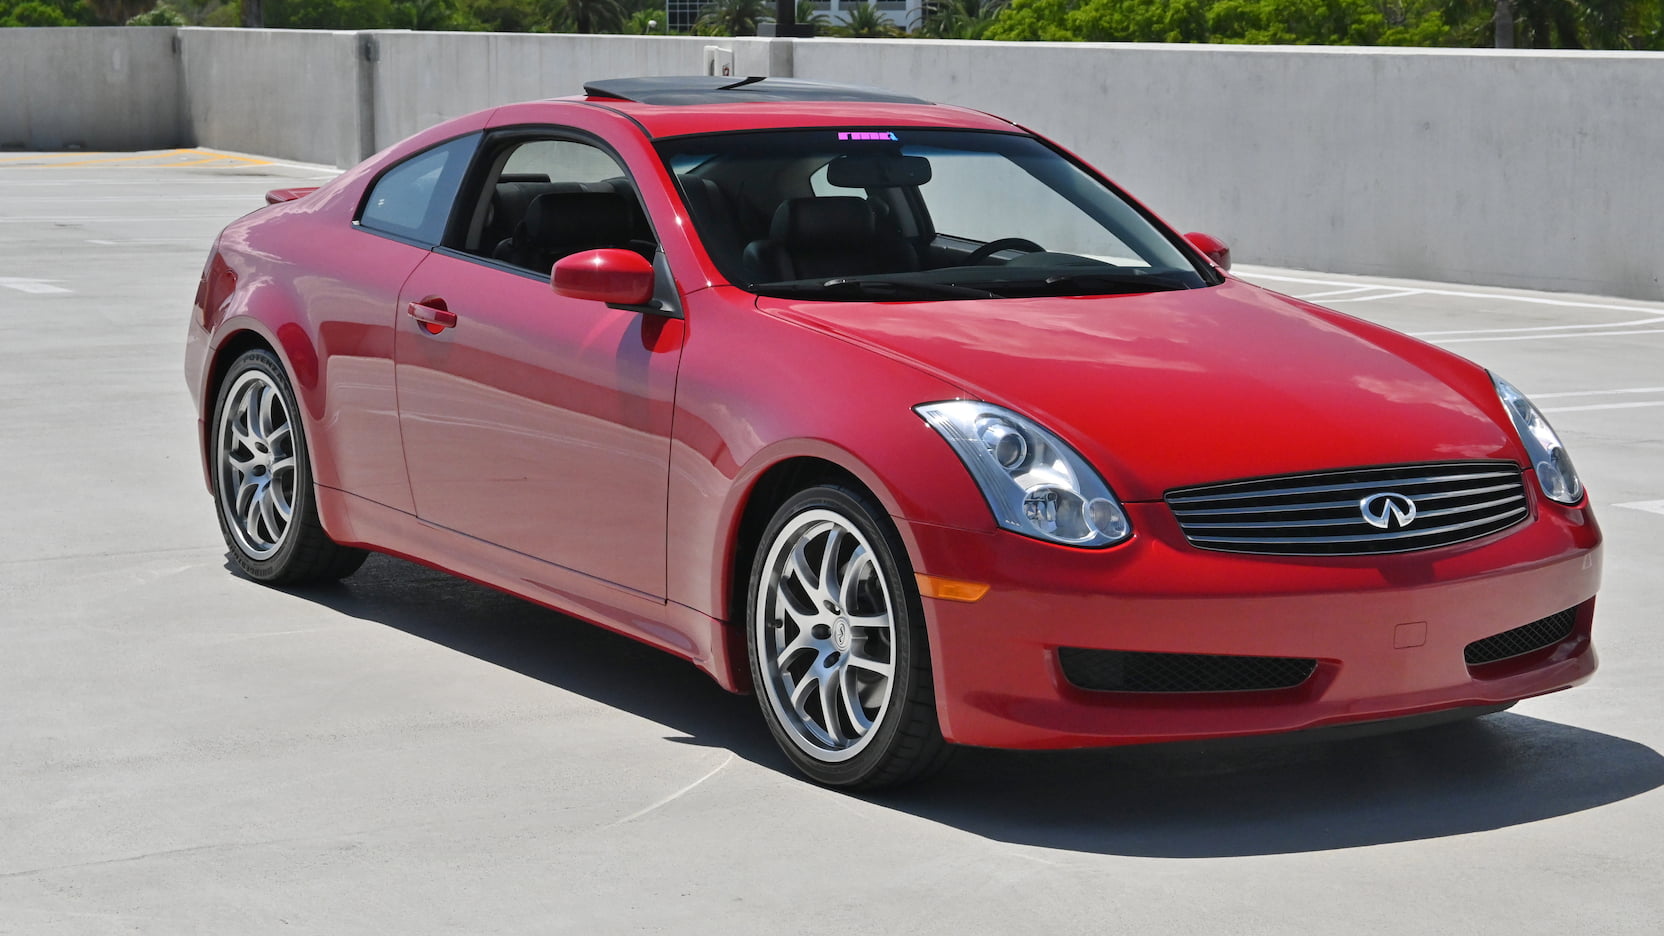 2007 Infiniti G35 Coupe at Kissimmee 2023 asK103 - Mecum Auctions